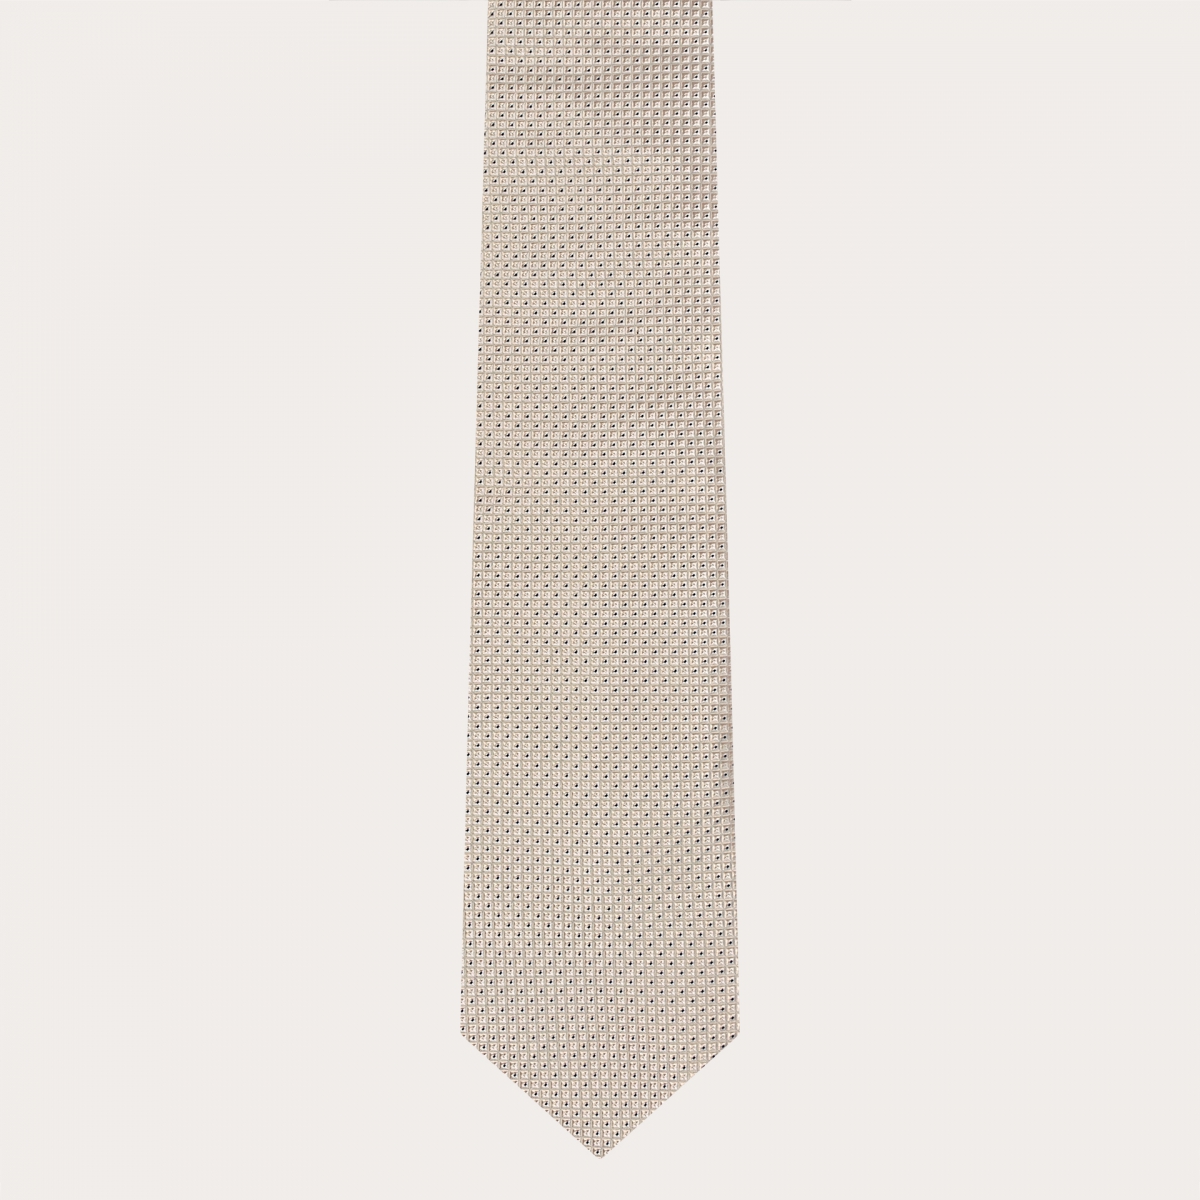 BRUCLE Ceremony set tie and pocket square, ivory with blue micro pattern